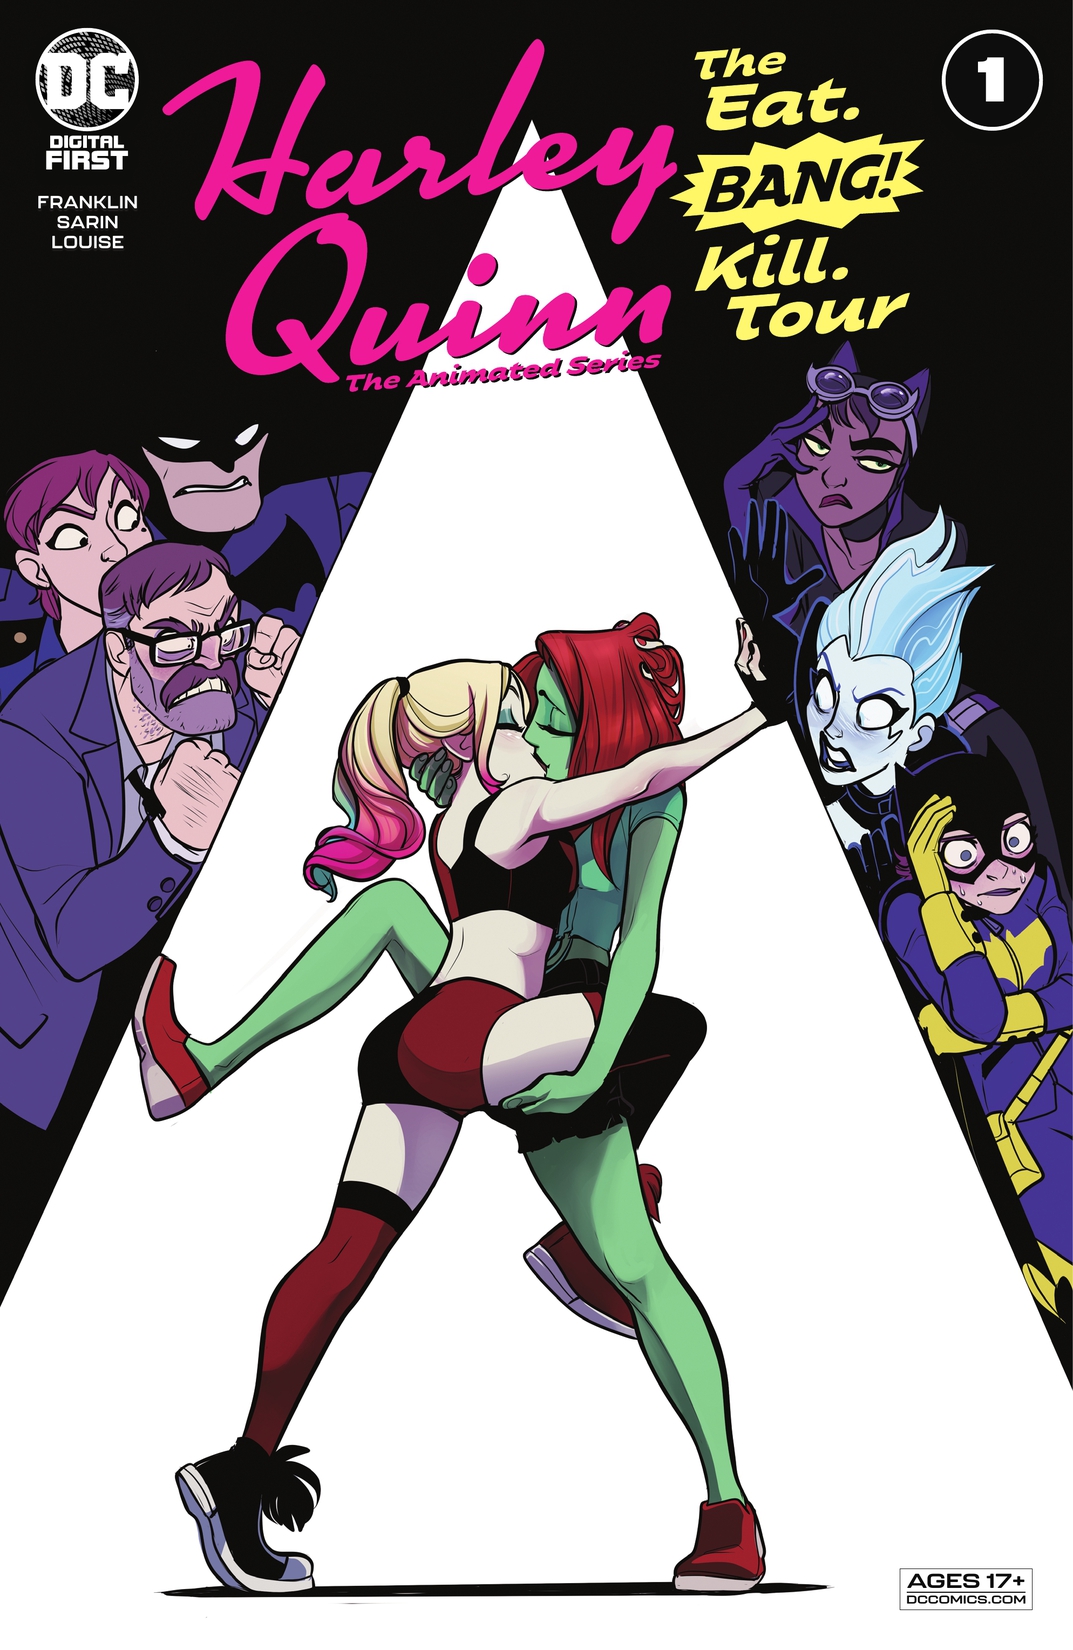 Harley Quinn: The Animated Series - The Eat. Bang. Kill Tour #1 preview images